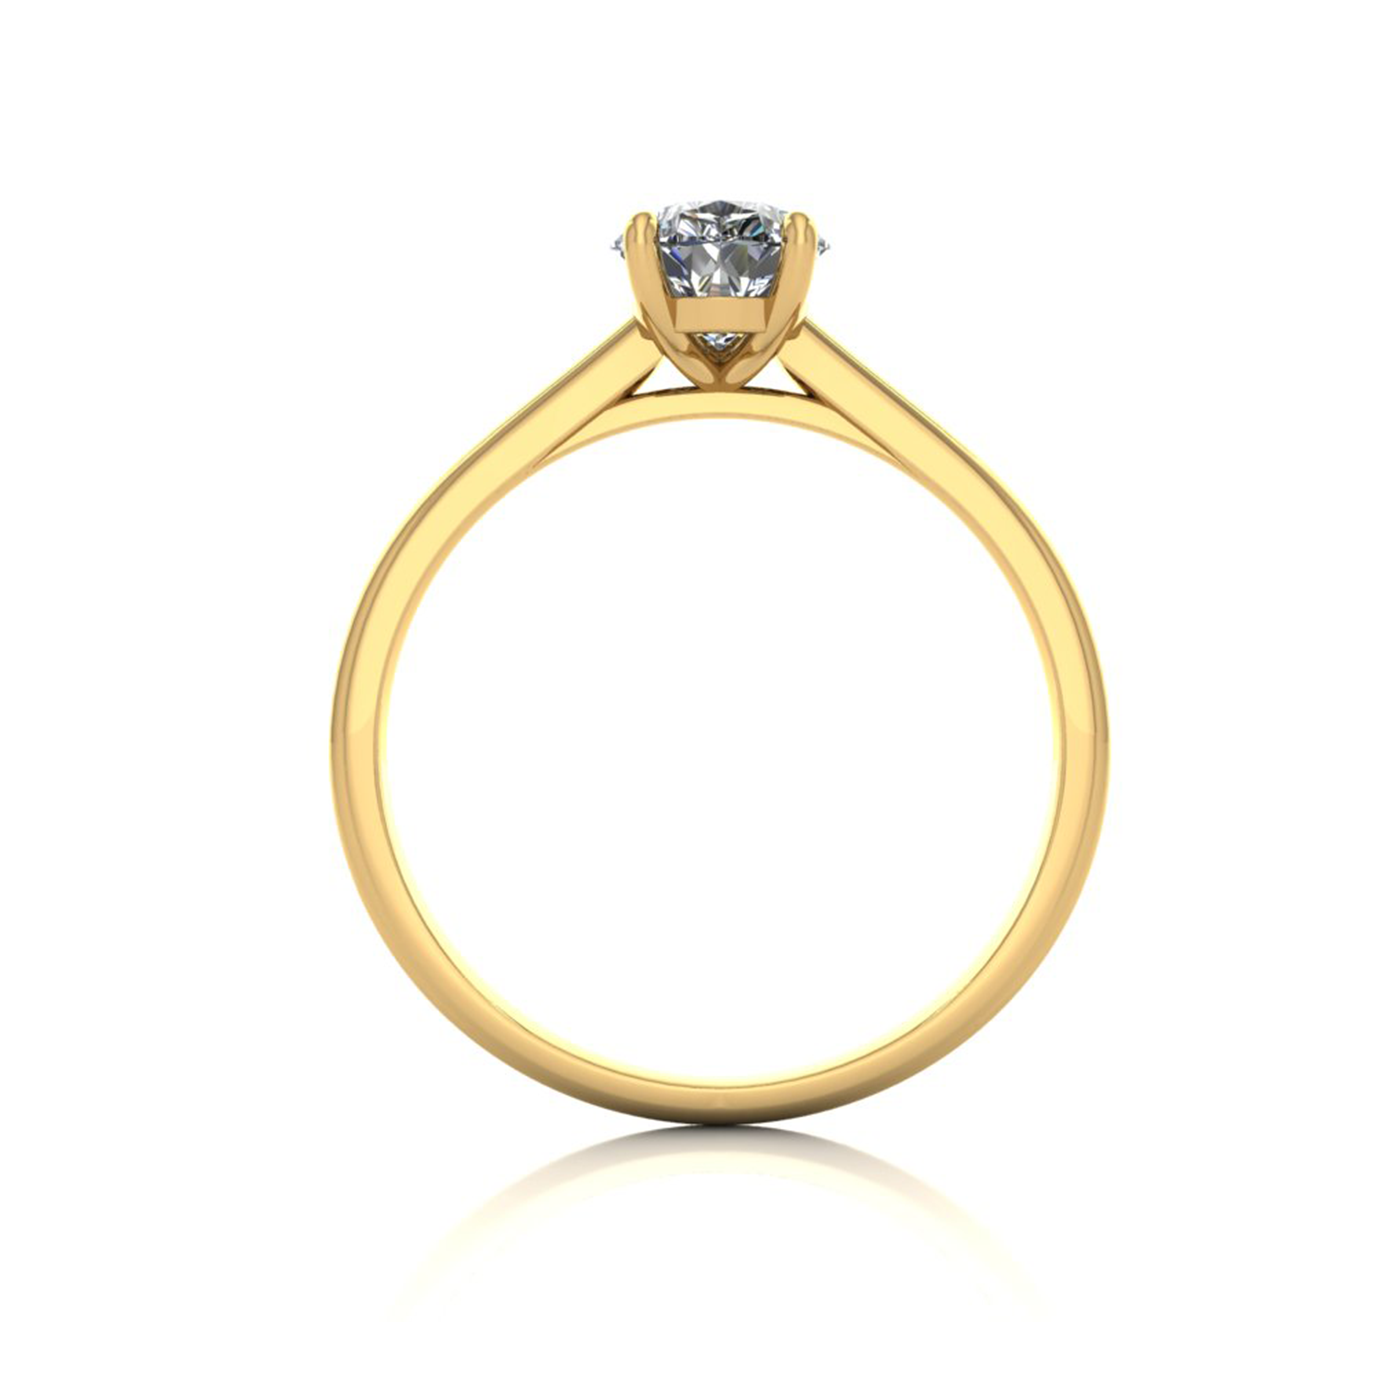 18K YELLOW GOLD 3 PRONGS SOLITAIRE PEAR CUT DIAMOND ENGAGEMENT RING WITH WHISPER THIN BAND